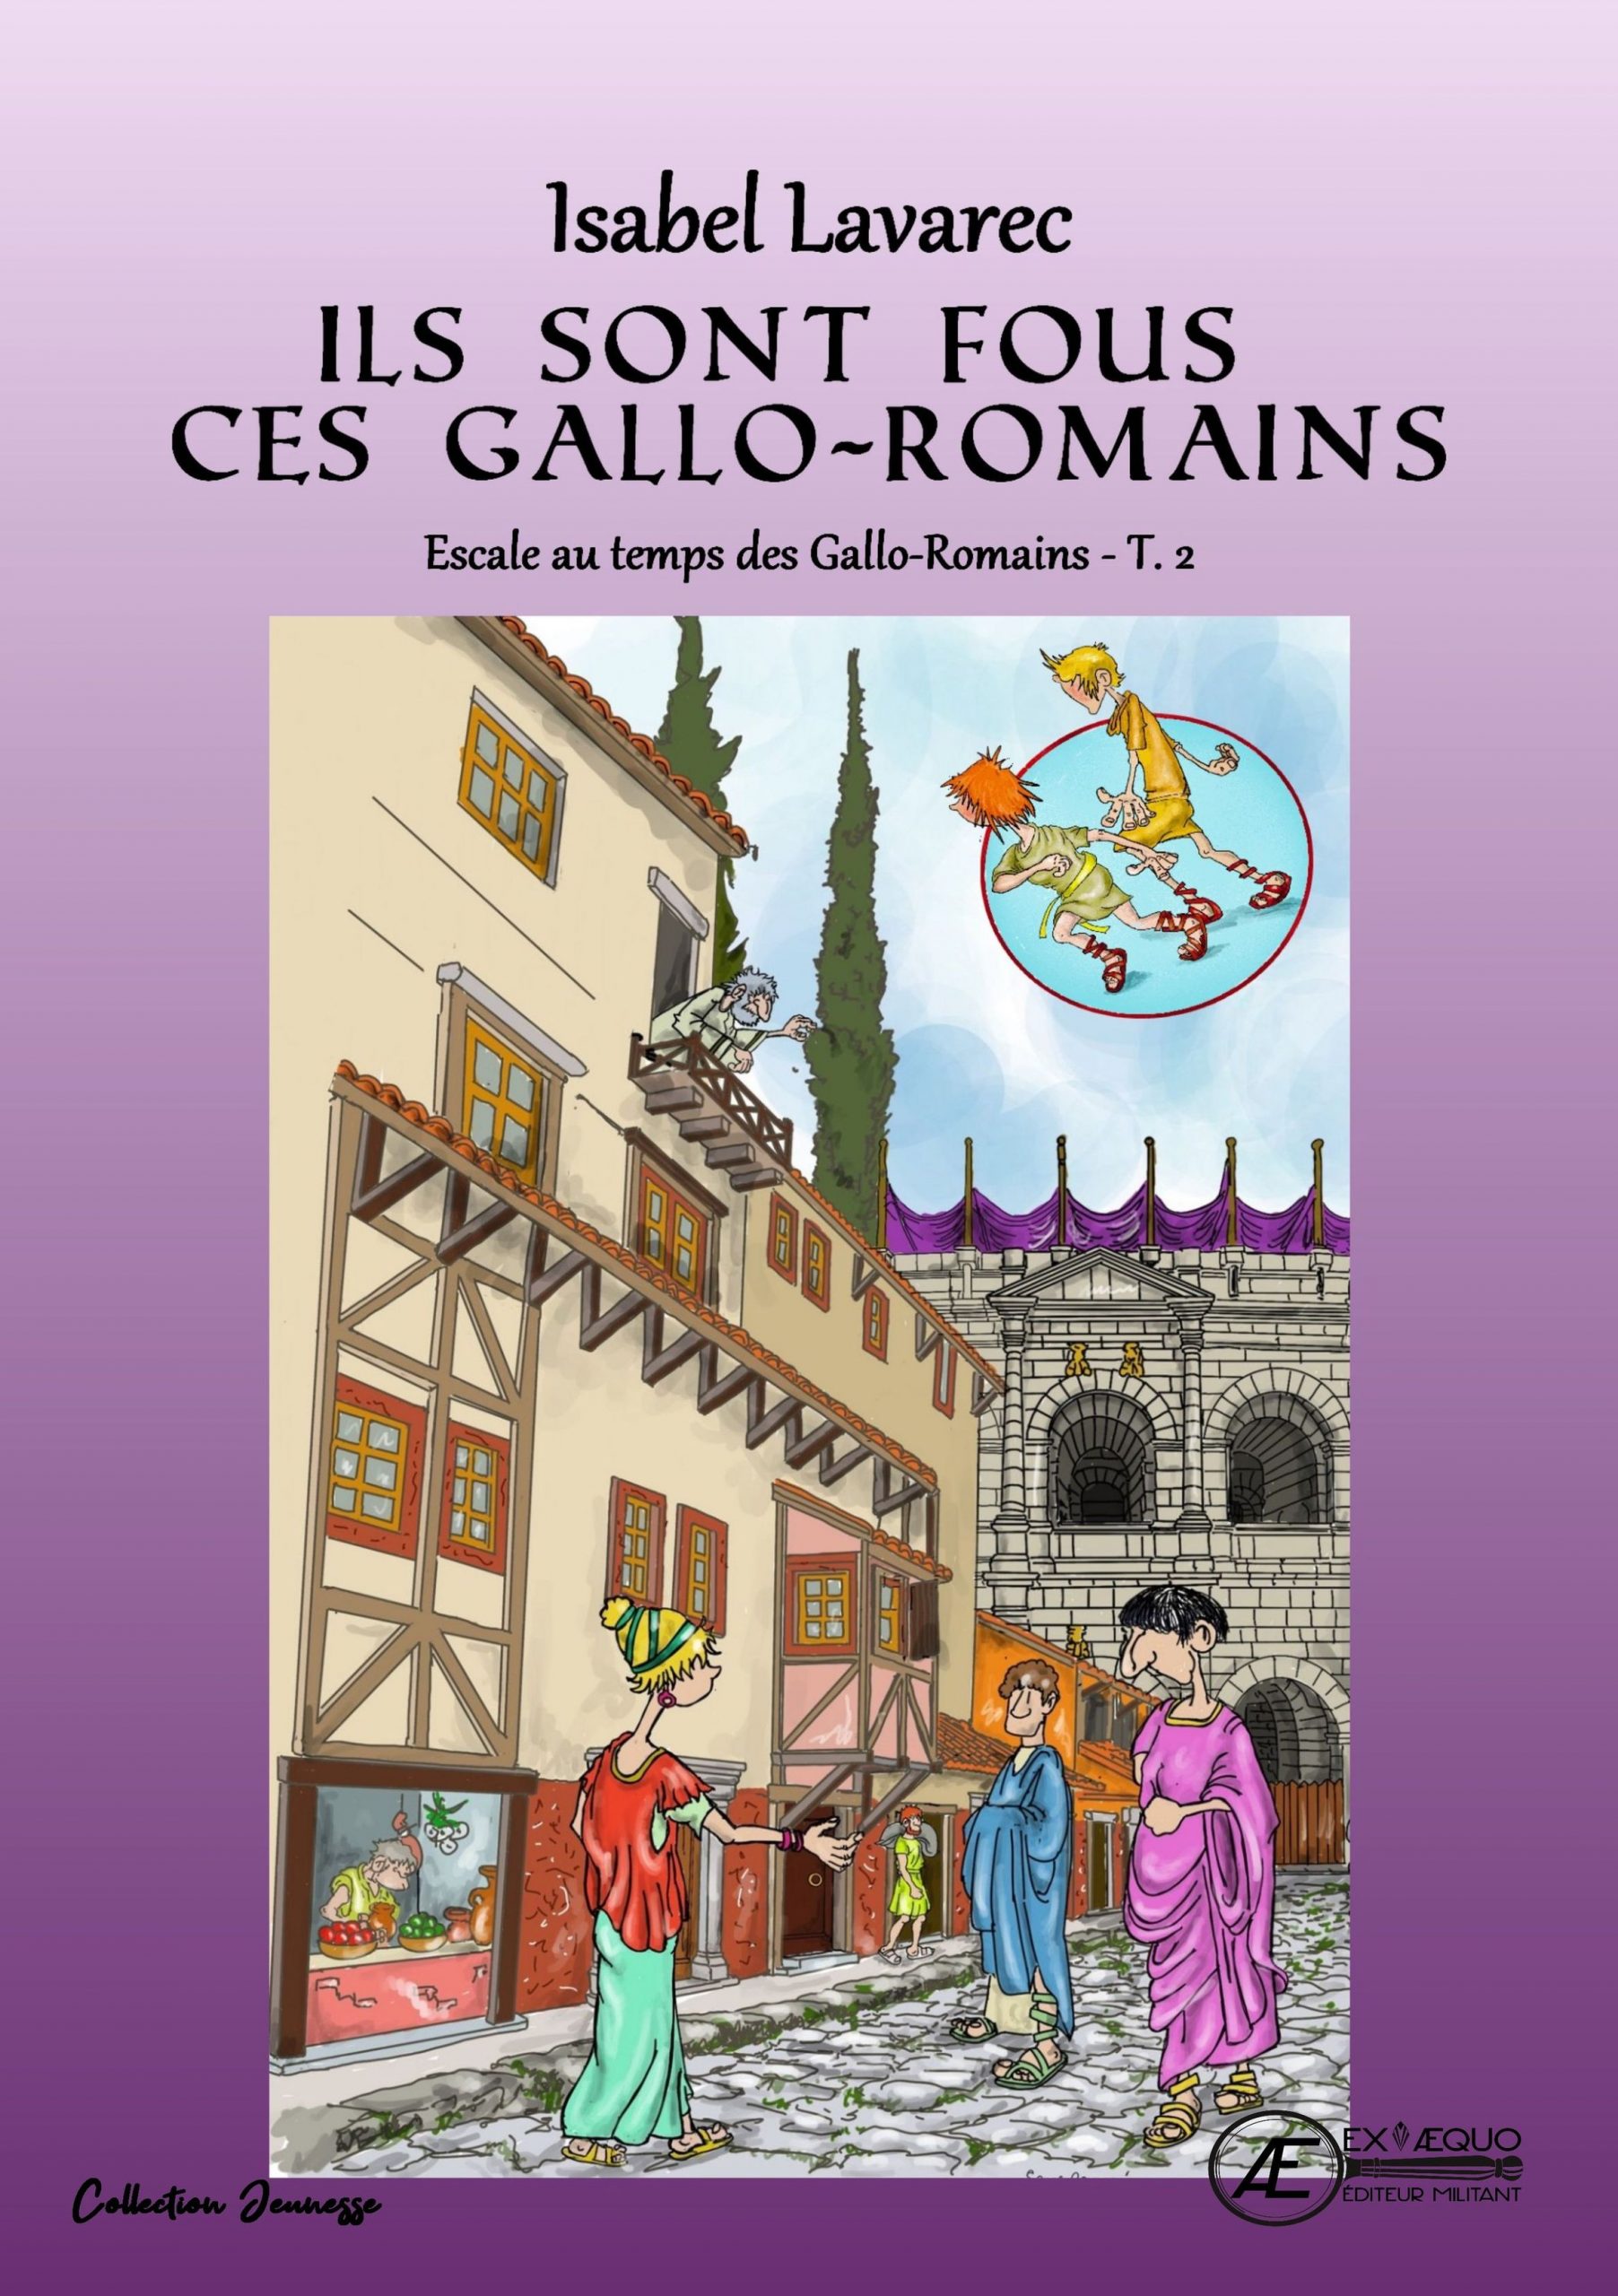 You are currently viewing Ils sont fous ces gallo-romains